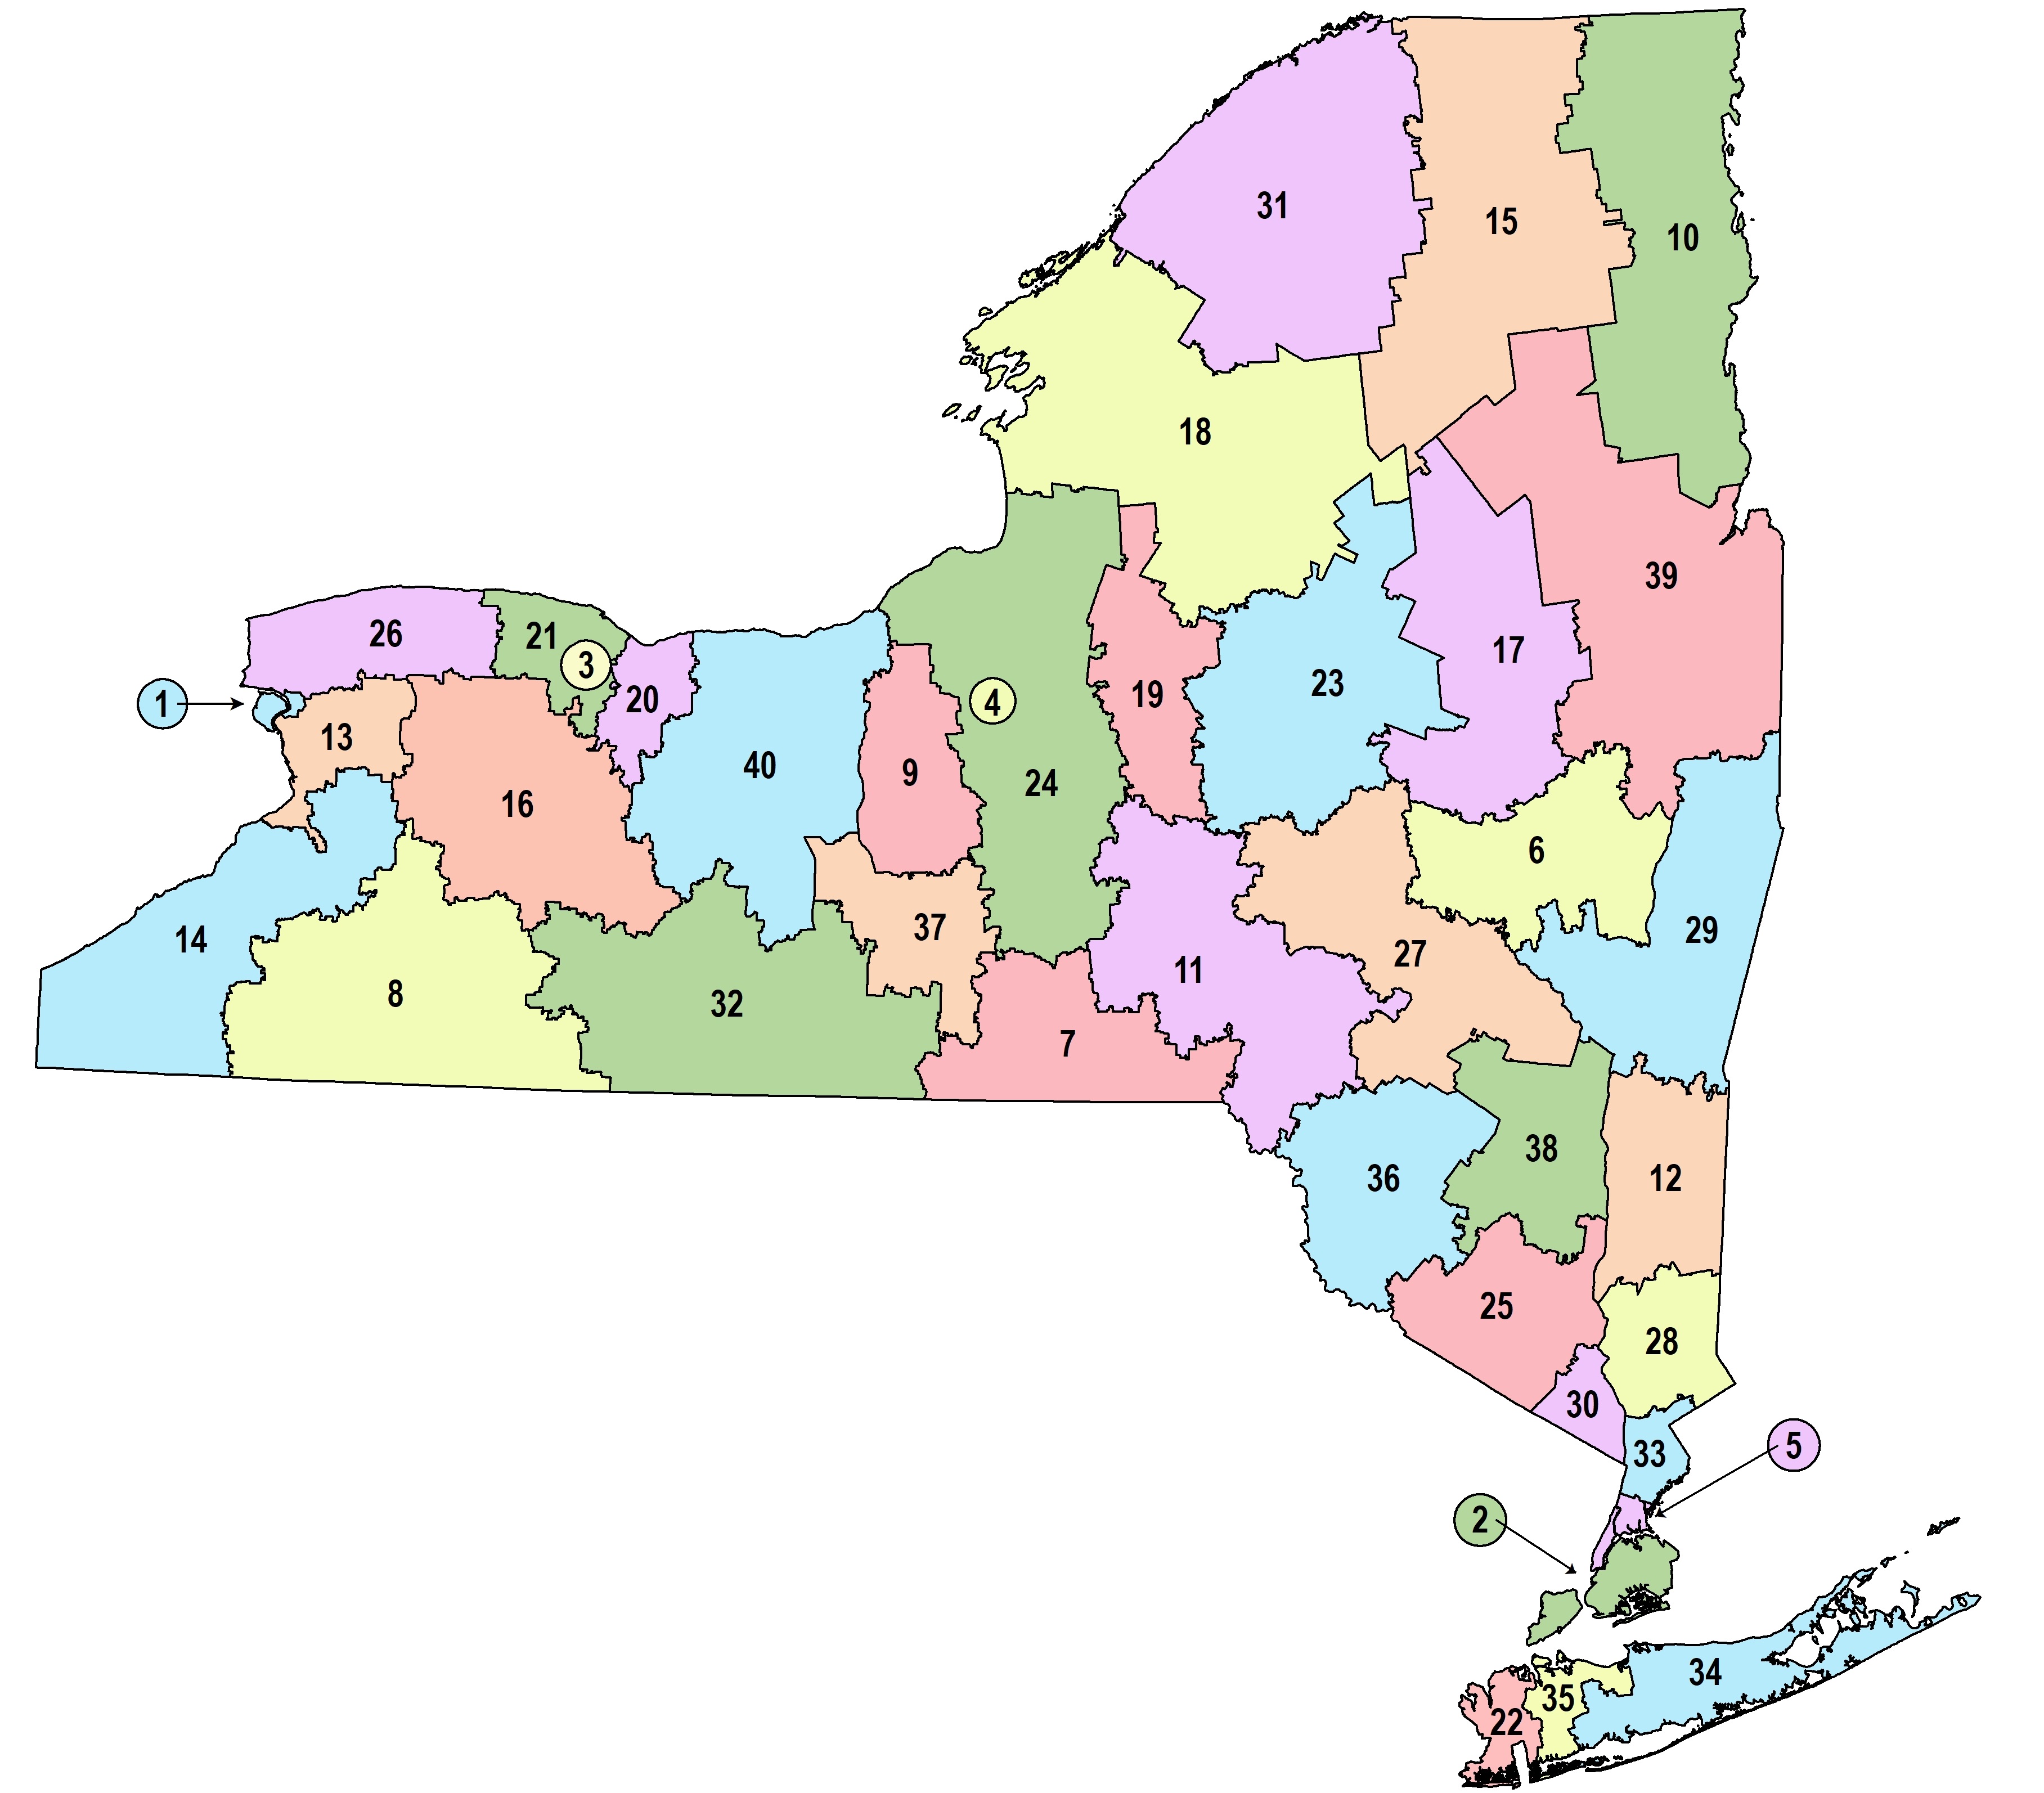 Click on this for an image map of school library systems in New York State